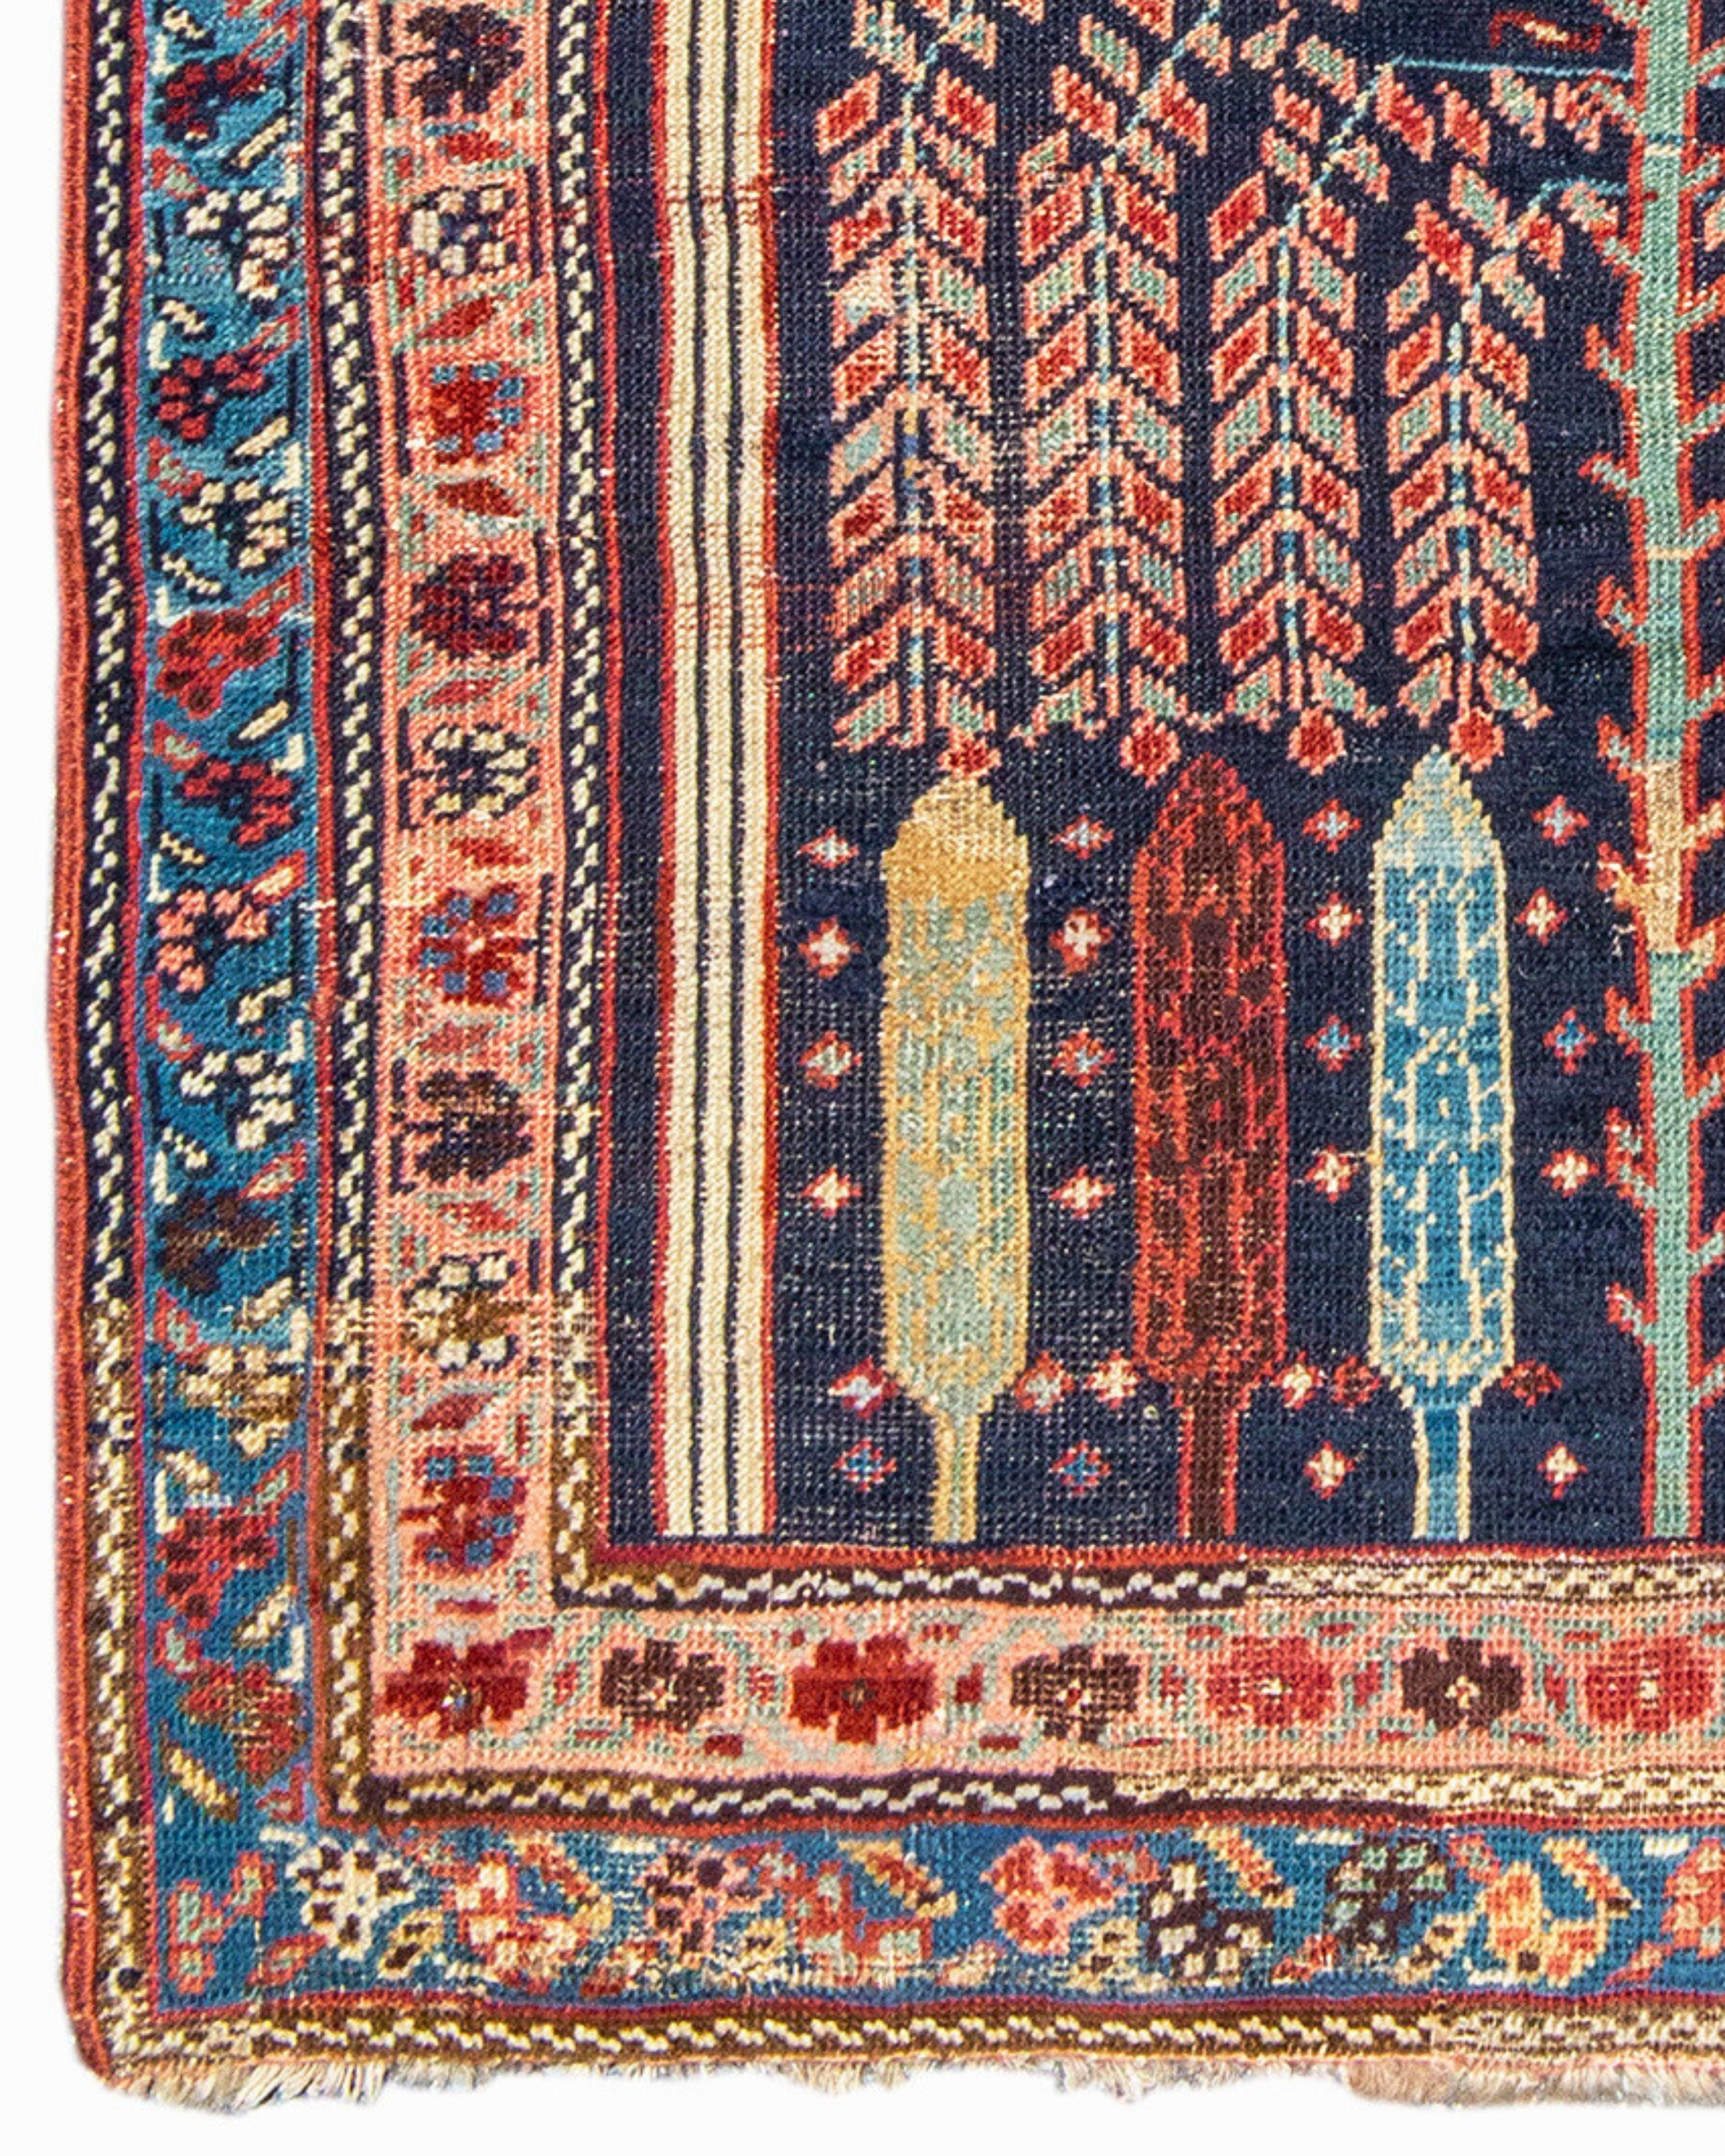 Antique Persian Bakshaish Prayer Rug, Mid-19th Century In Good Condition For Sale In San Francisco, CA